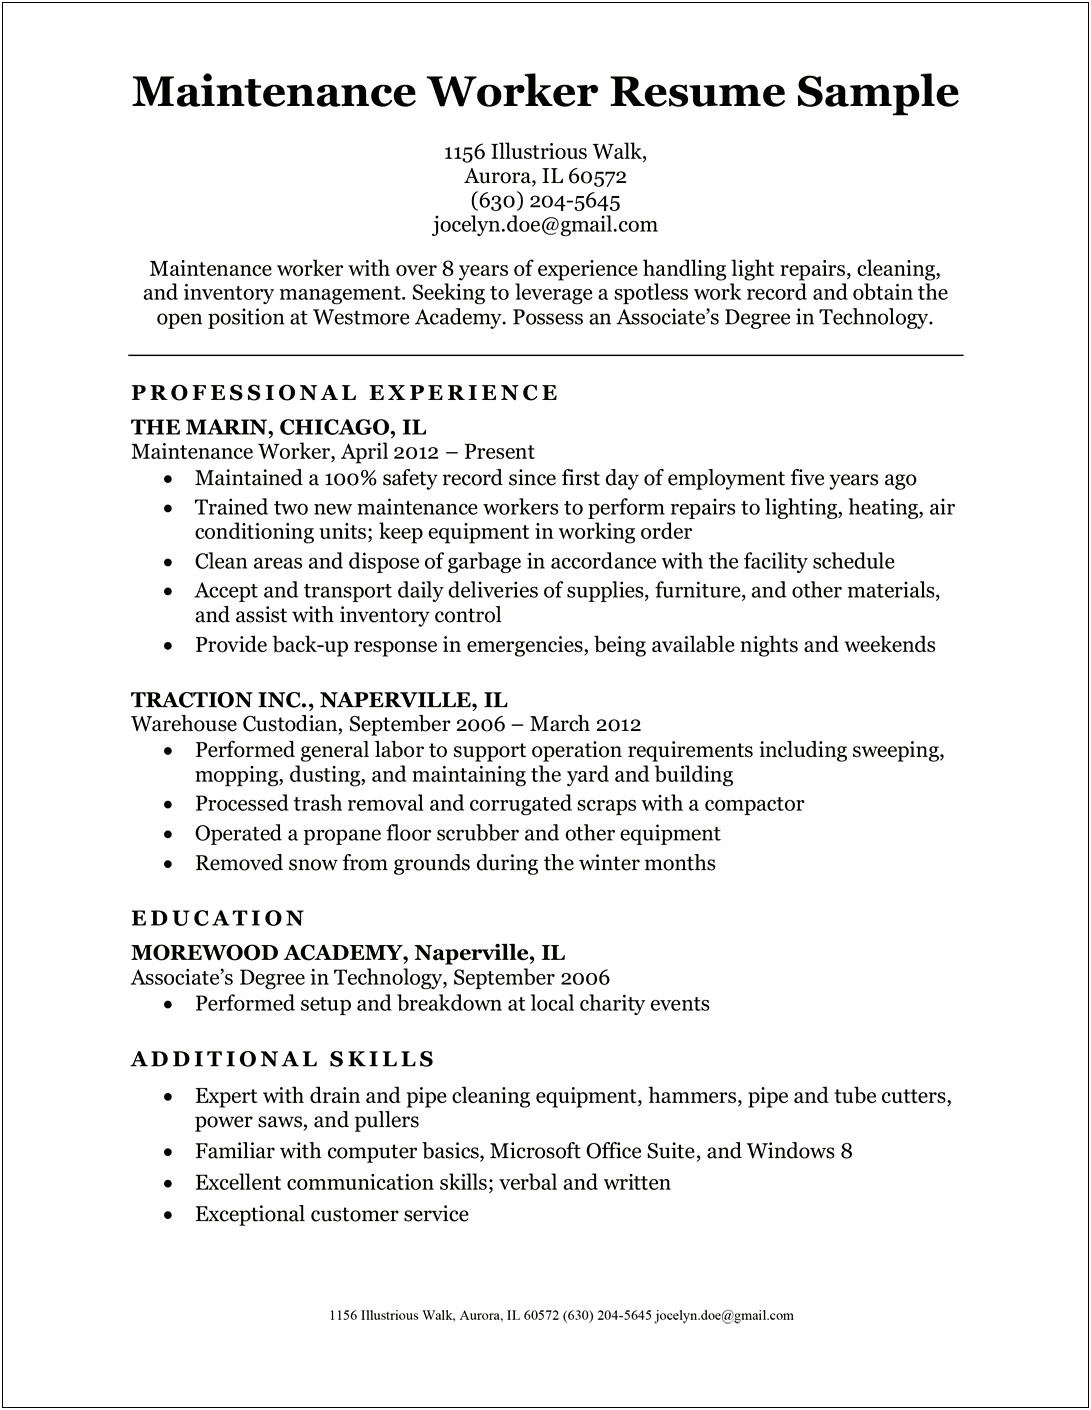 Sample Objectives For A Resume For A Laborer